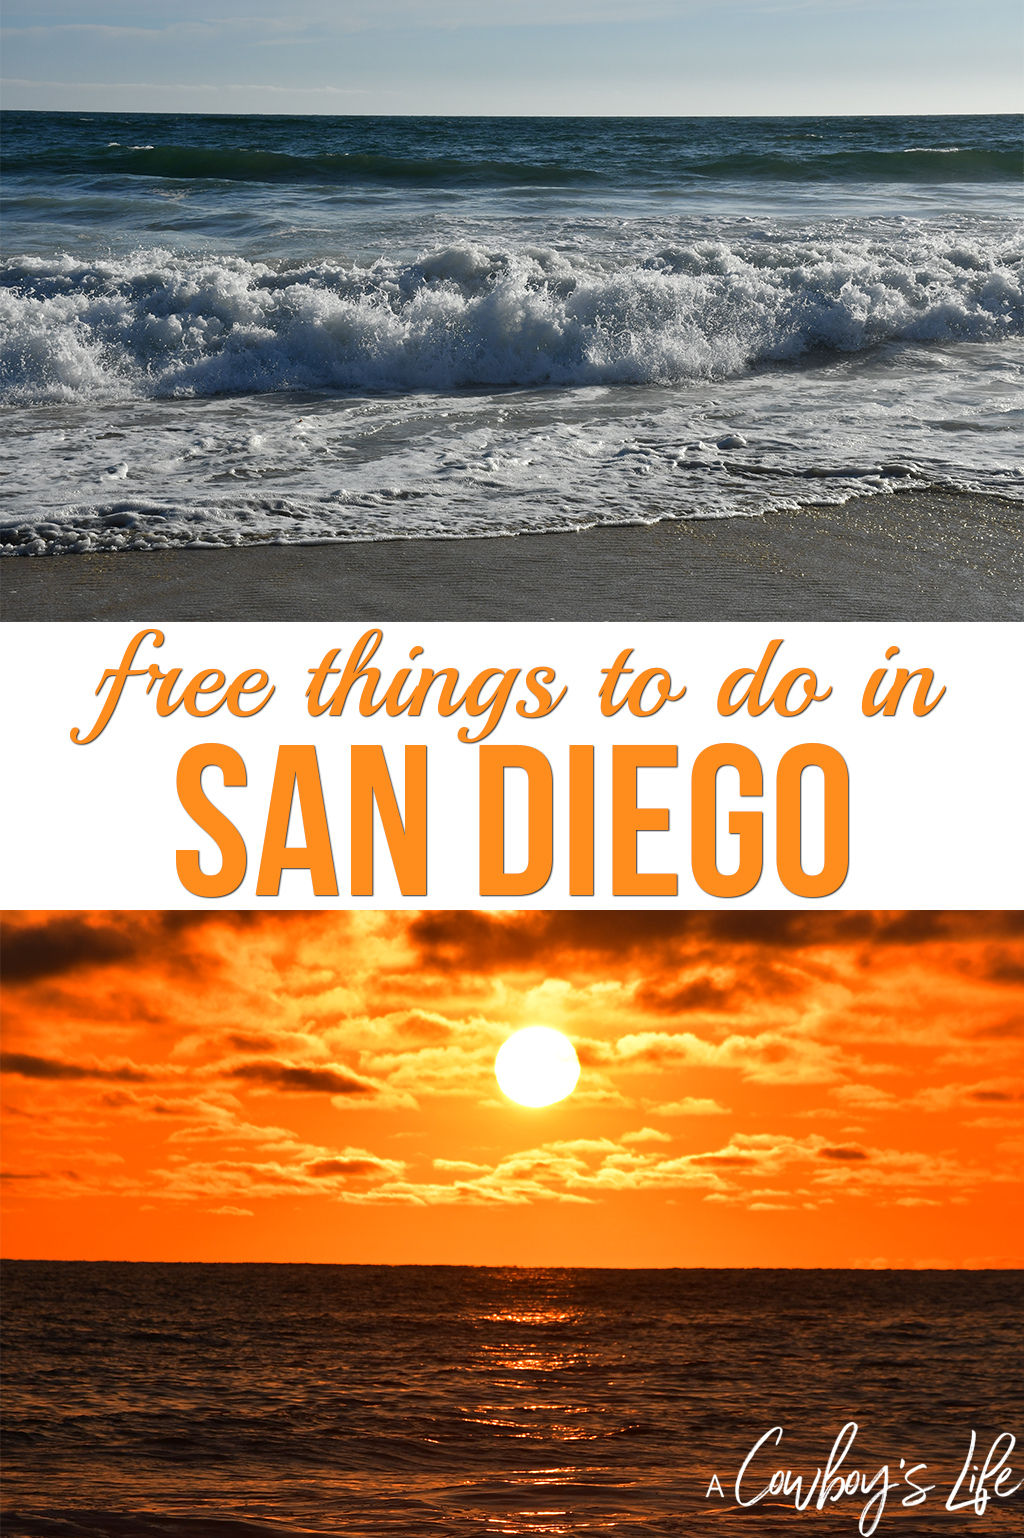 Free things to do in San Diego